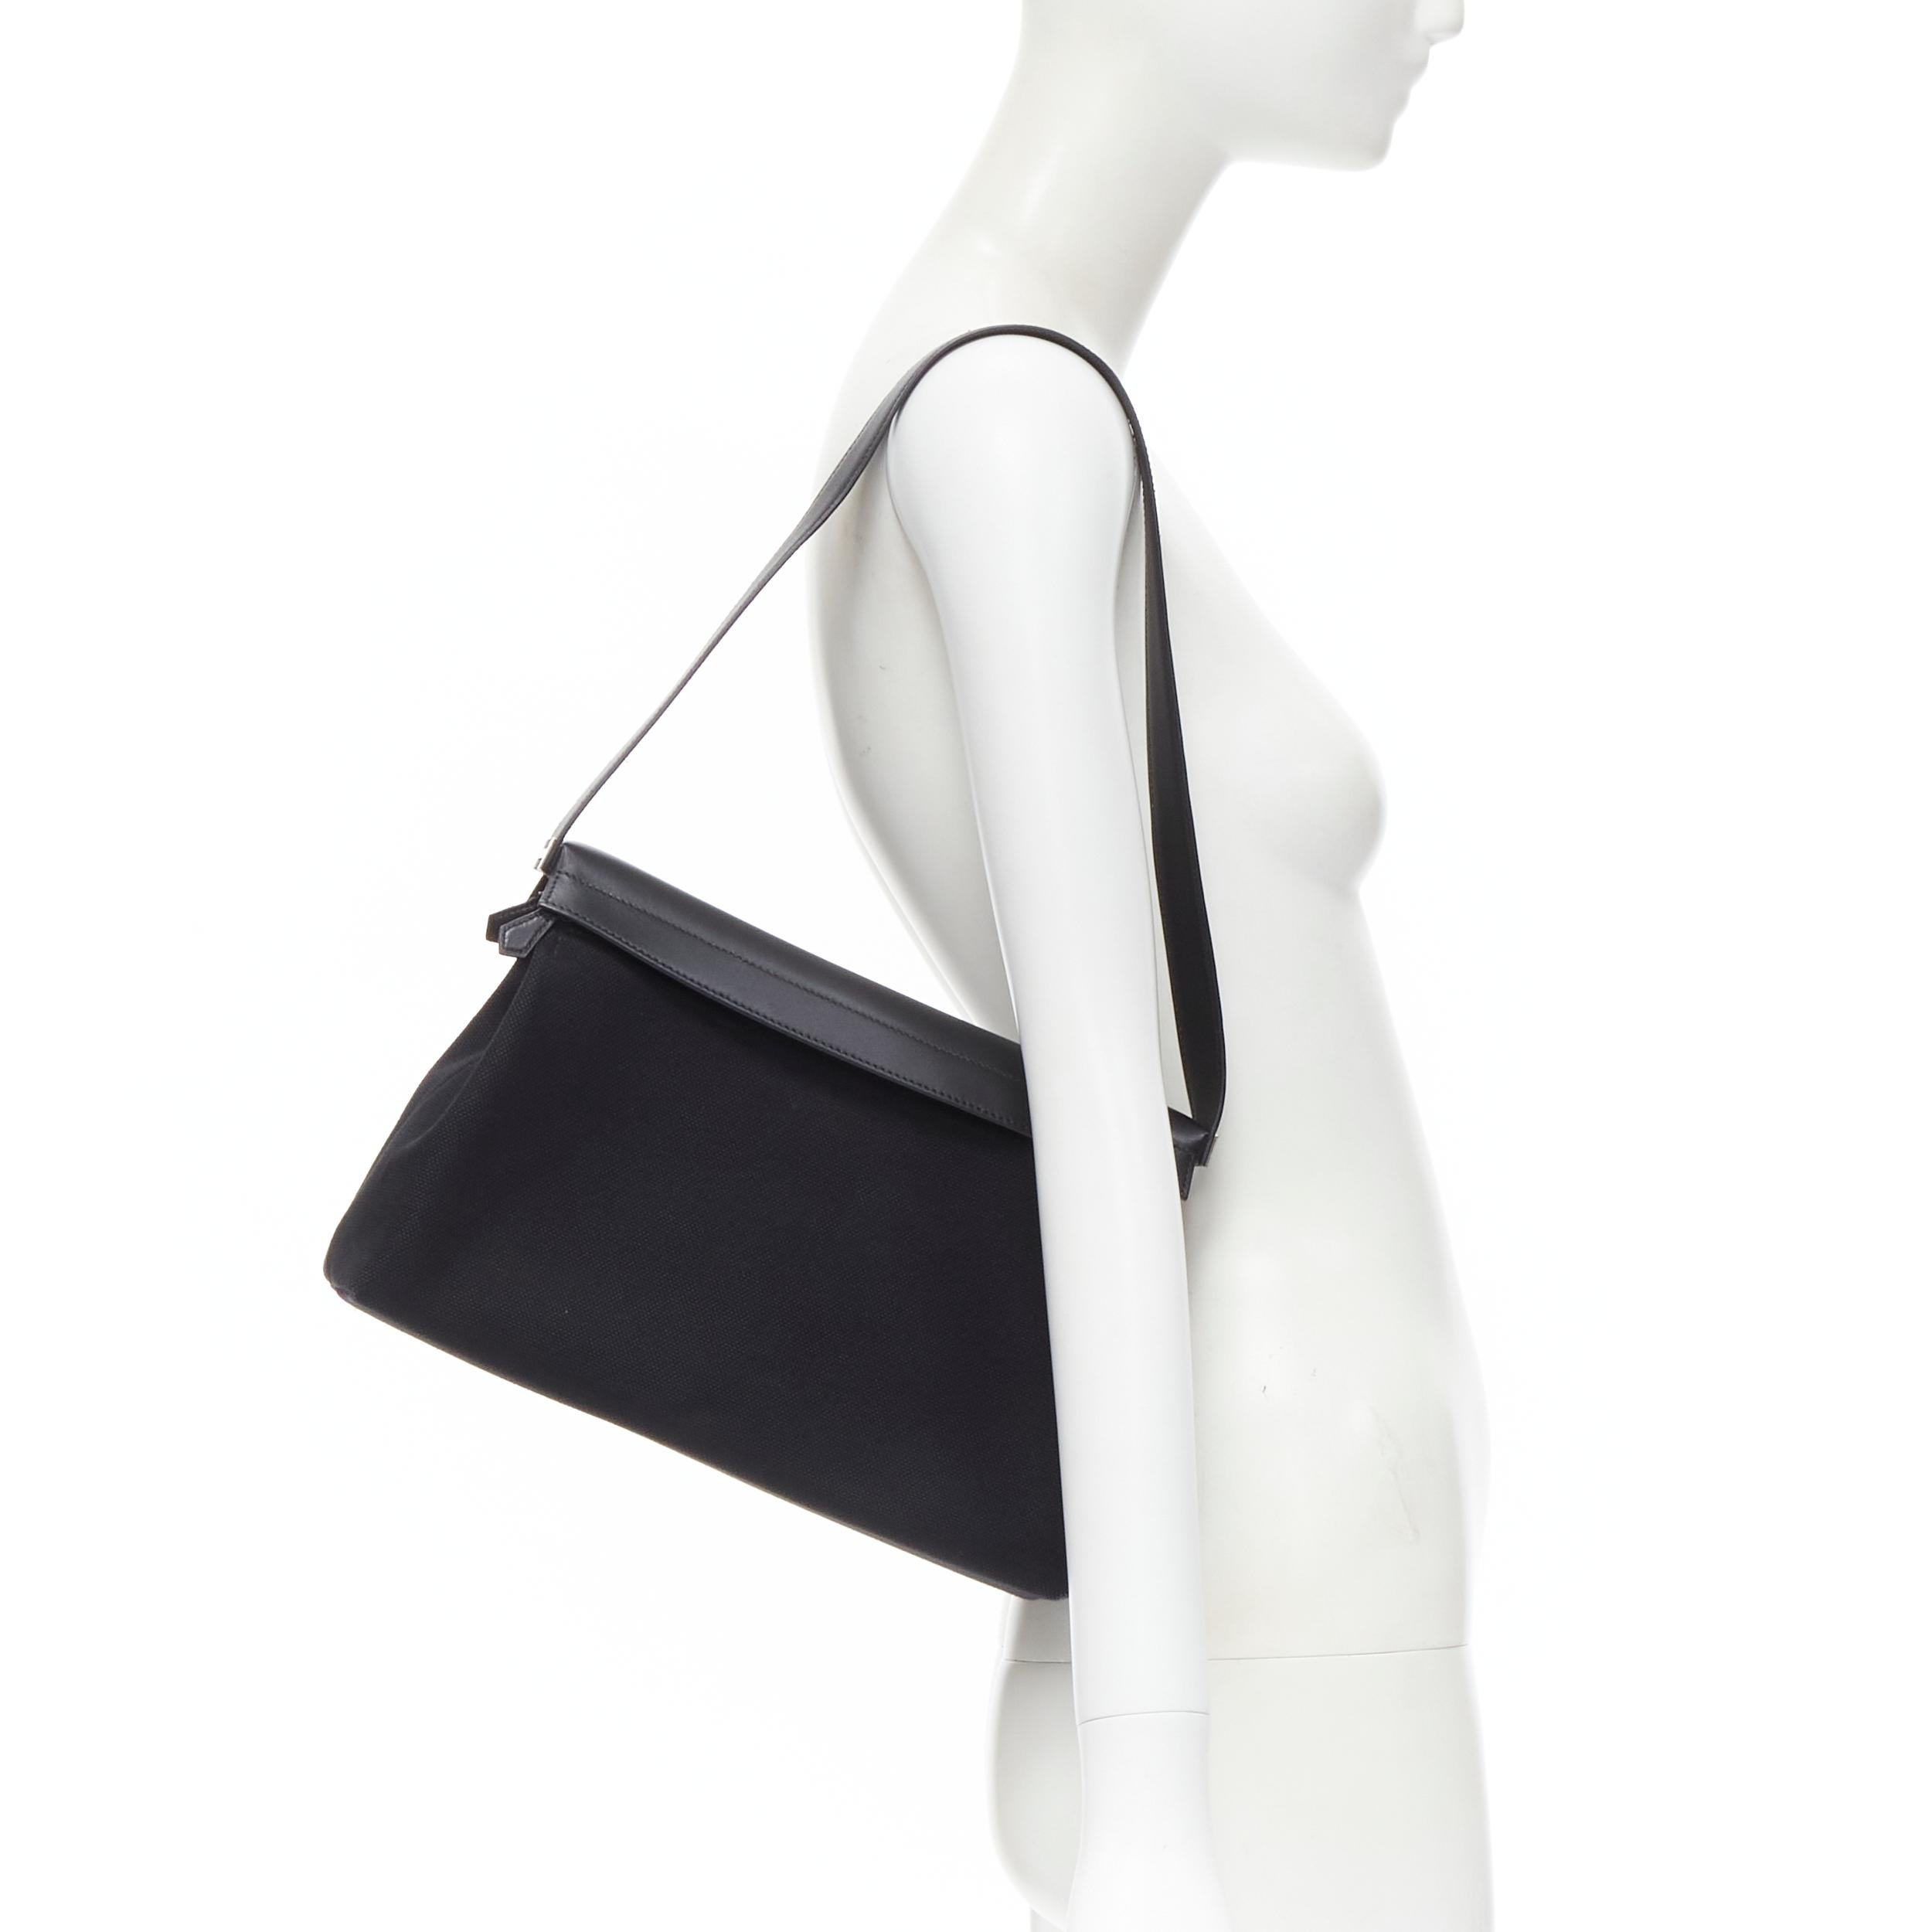 rare HERMES black canvas silver leather 2-in-1 convertible shoulder bag 
Reference: TGAS/B01638 
Brand: Hermes 
Model: Convertible 2 in 1 shoulder bag 
Material: Leather 
Color: Black 
Pattern: Solid 
Closure: Zip 
Extra Detail: 2-in-1 convertible